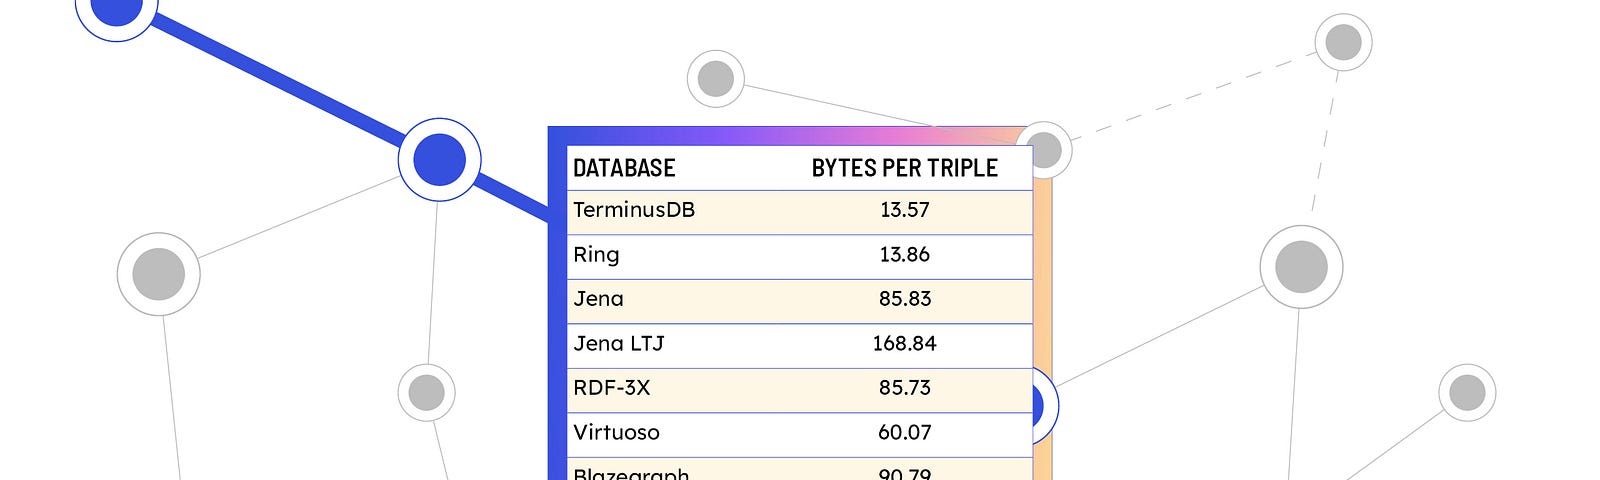 A picture of a table showing different graph databases and the tripe storage in bytes — Ring  13.86,  Jena  85.83, Jena LTJ 168.84, RDF-3X 85.73, Virtuoso 60.07, Blazegraph 90.79